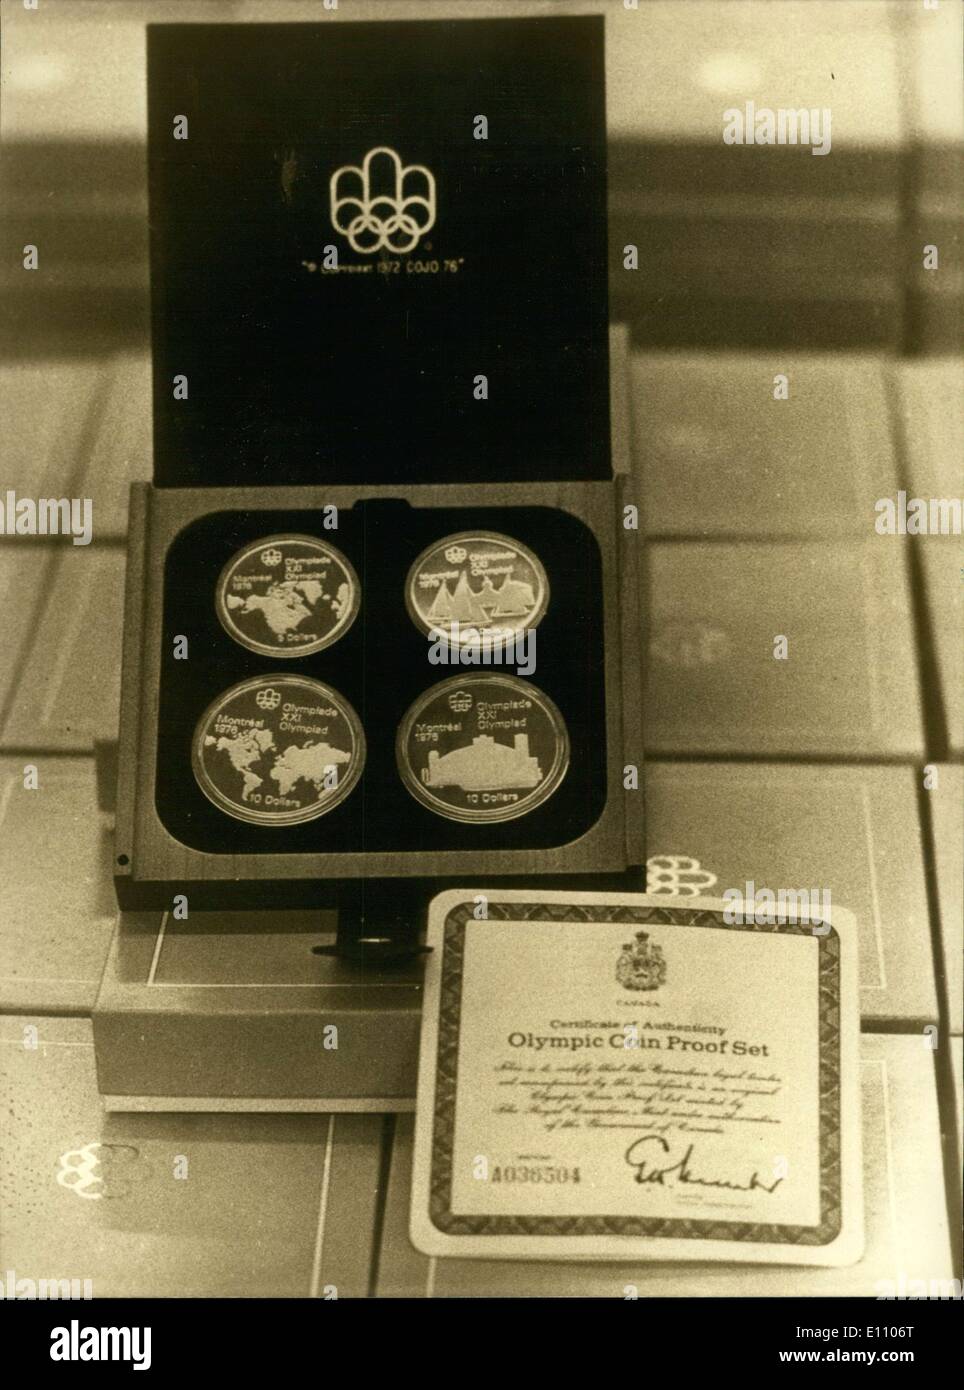 Sep. 30, 1974 - Canada's Olympic Commemorative Coins Made at Canadian Mint Stock Photo